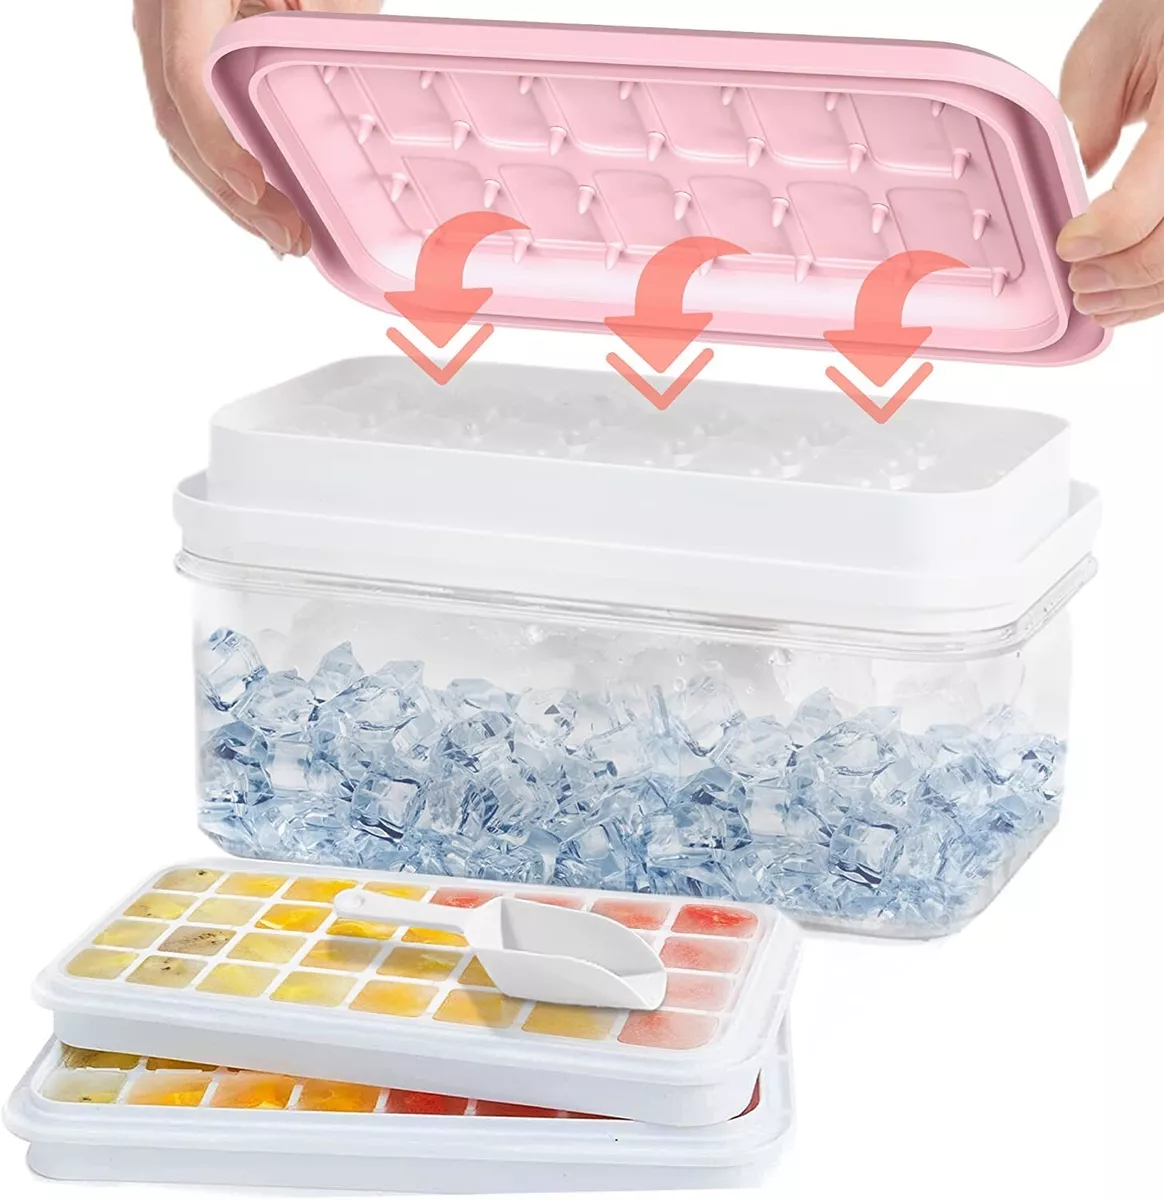 Silicone Ice Cube Tray with Lid and Bin for Freezer, 56 Nugget Ice Tray  (Pink)